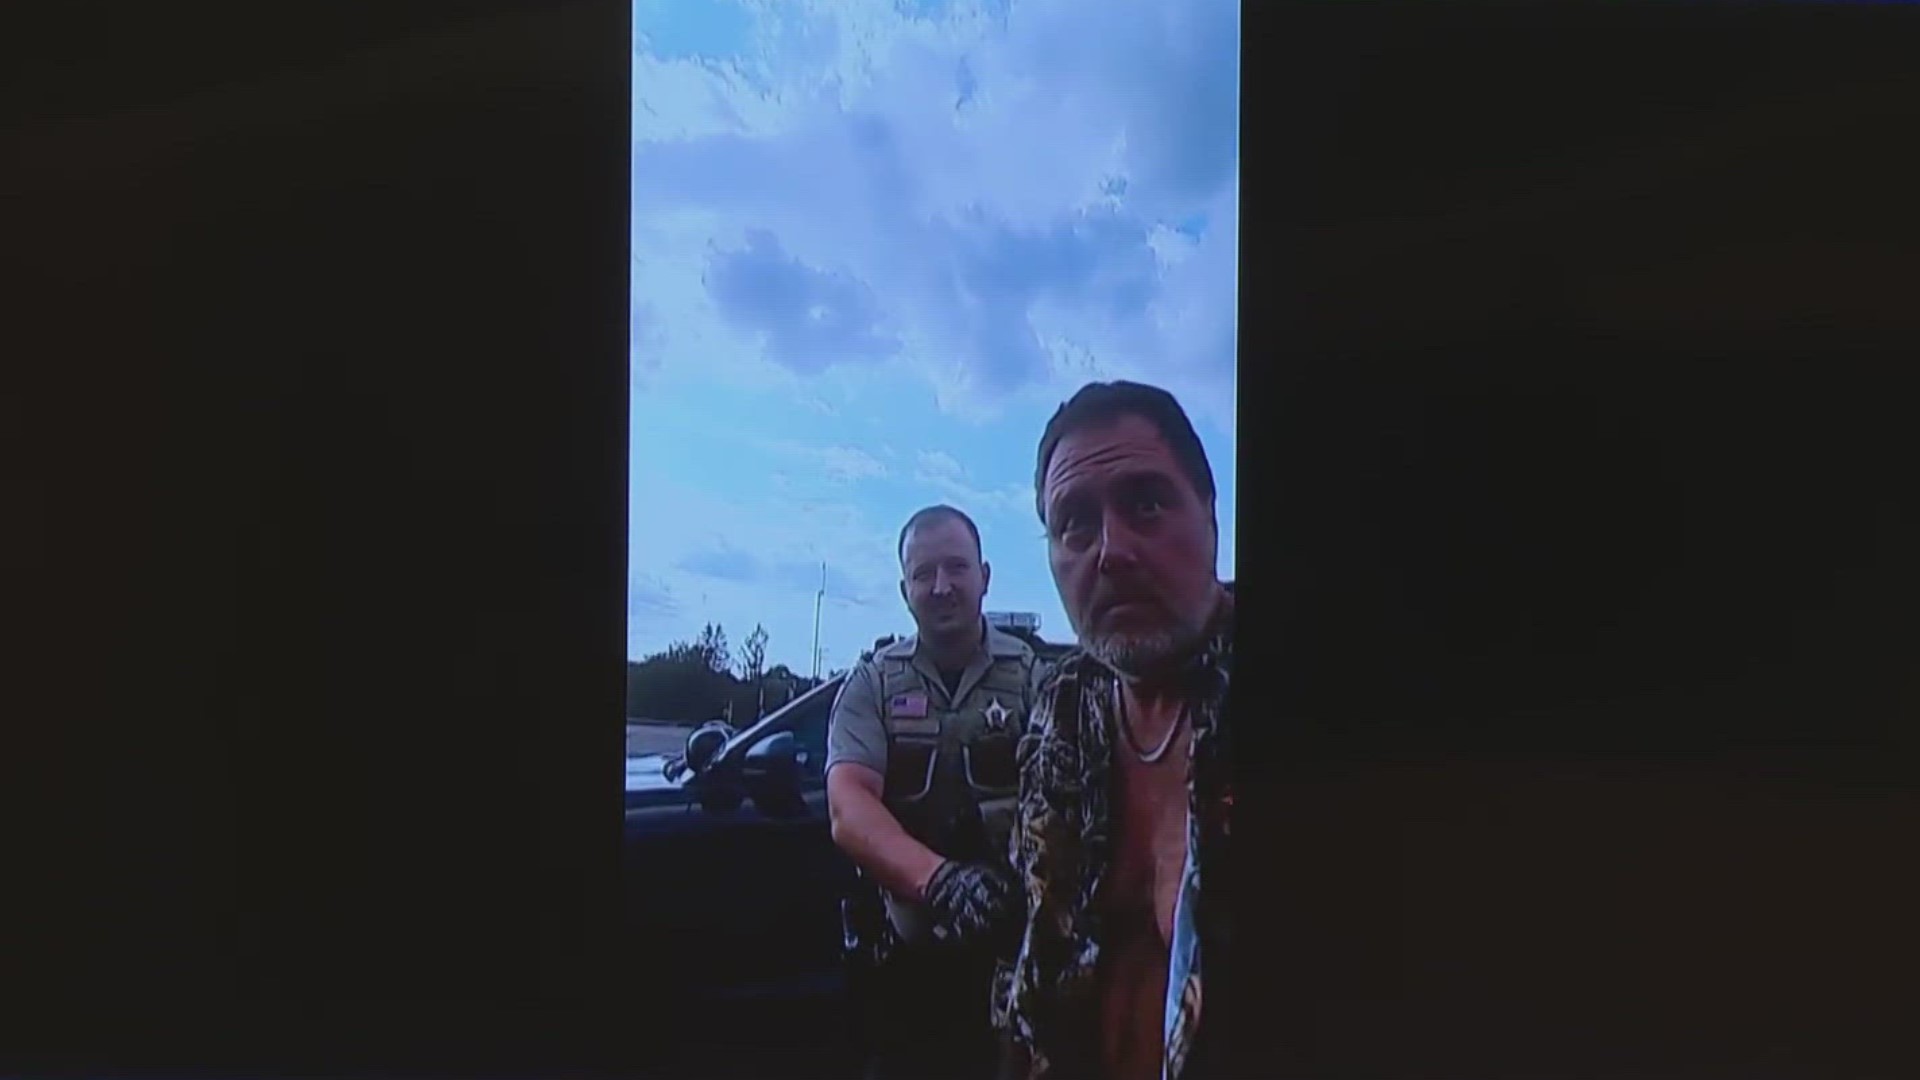 In court Thursday, prosecutors released bodycam footage of a St. Croix County Sheriff's lieutenant informing Nicolae Miu he is being arrested for homicide.